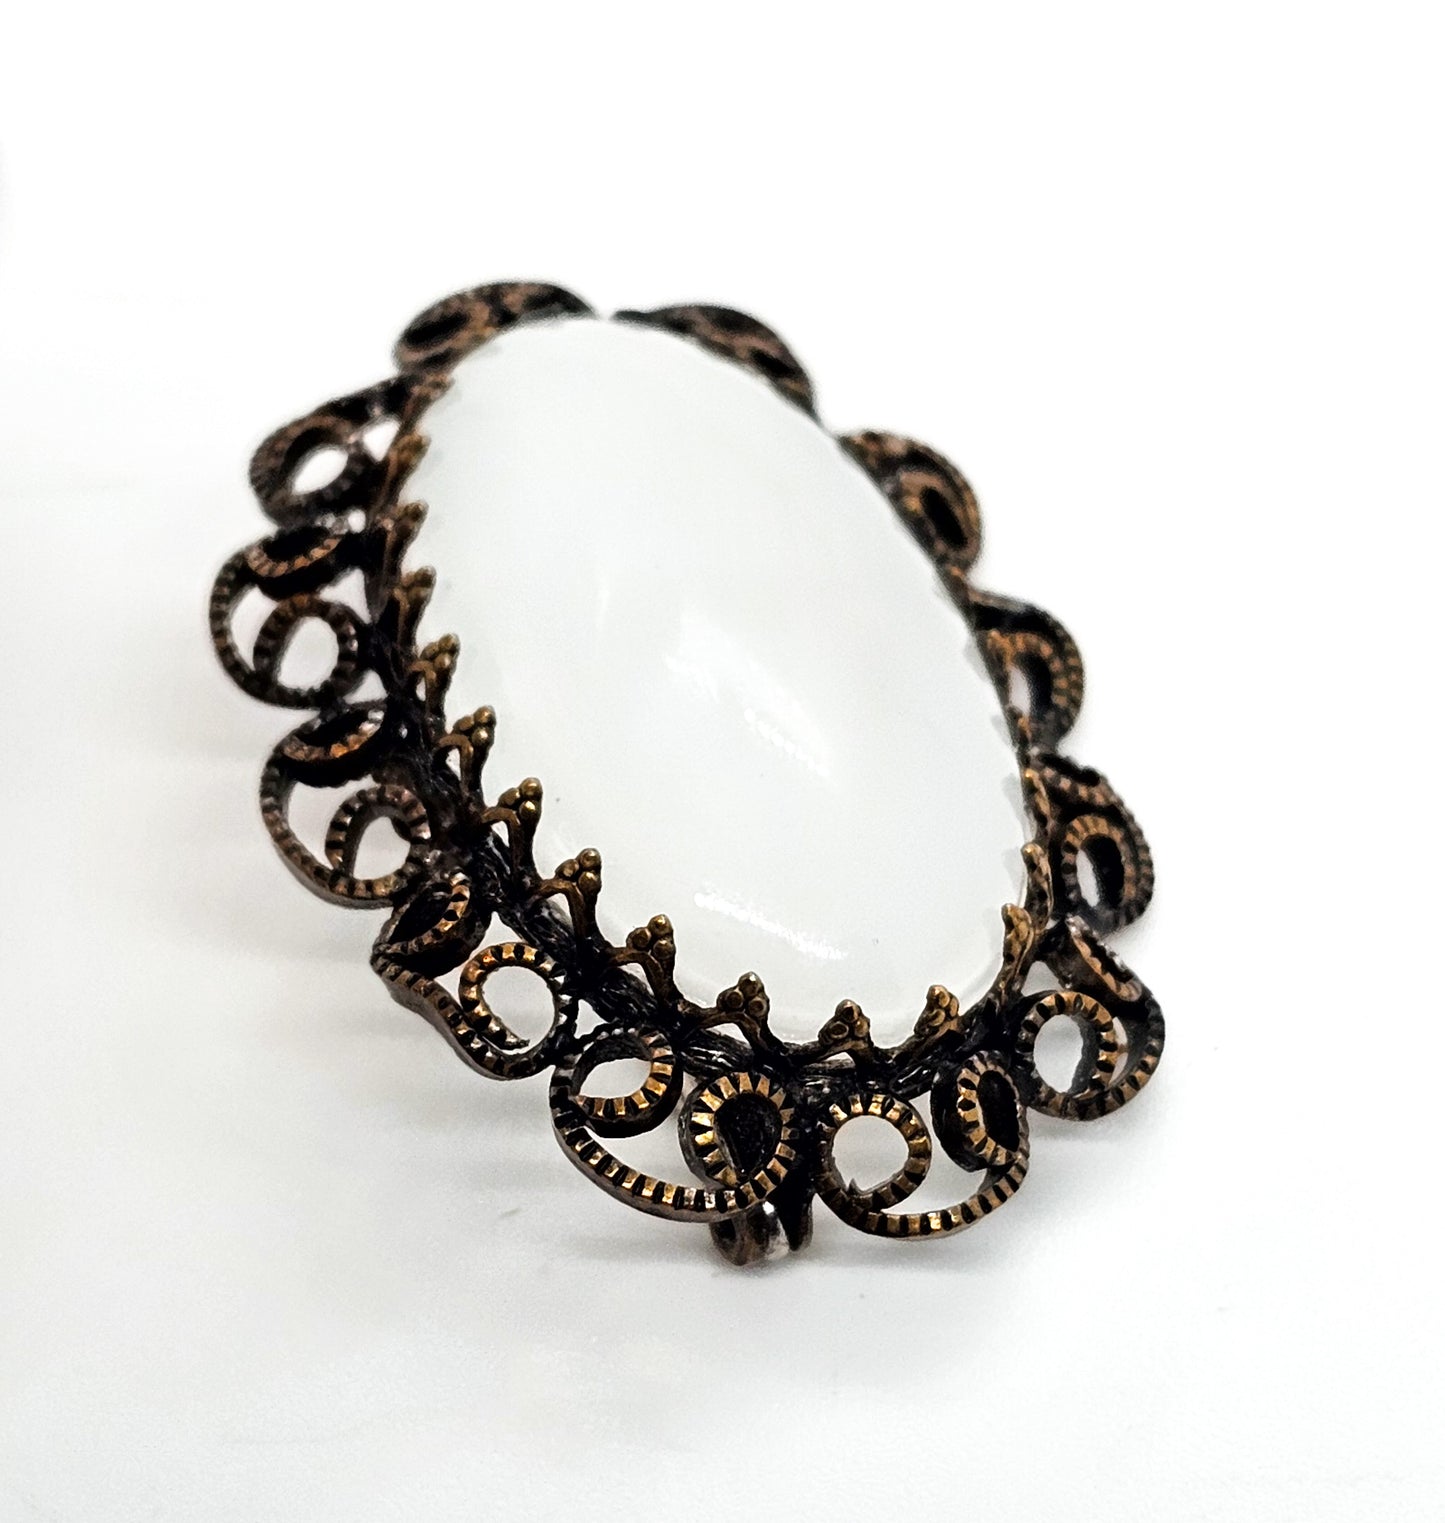 Austrian white Cat's Eye moonglow glass with filigree frame vintage brooch